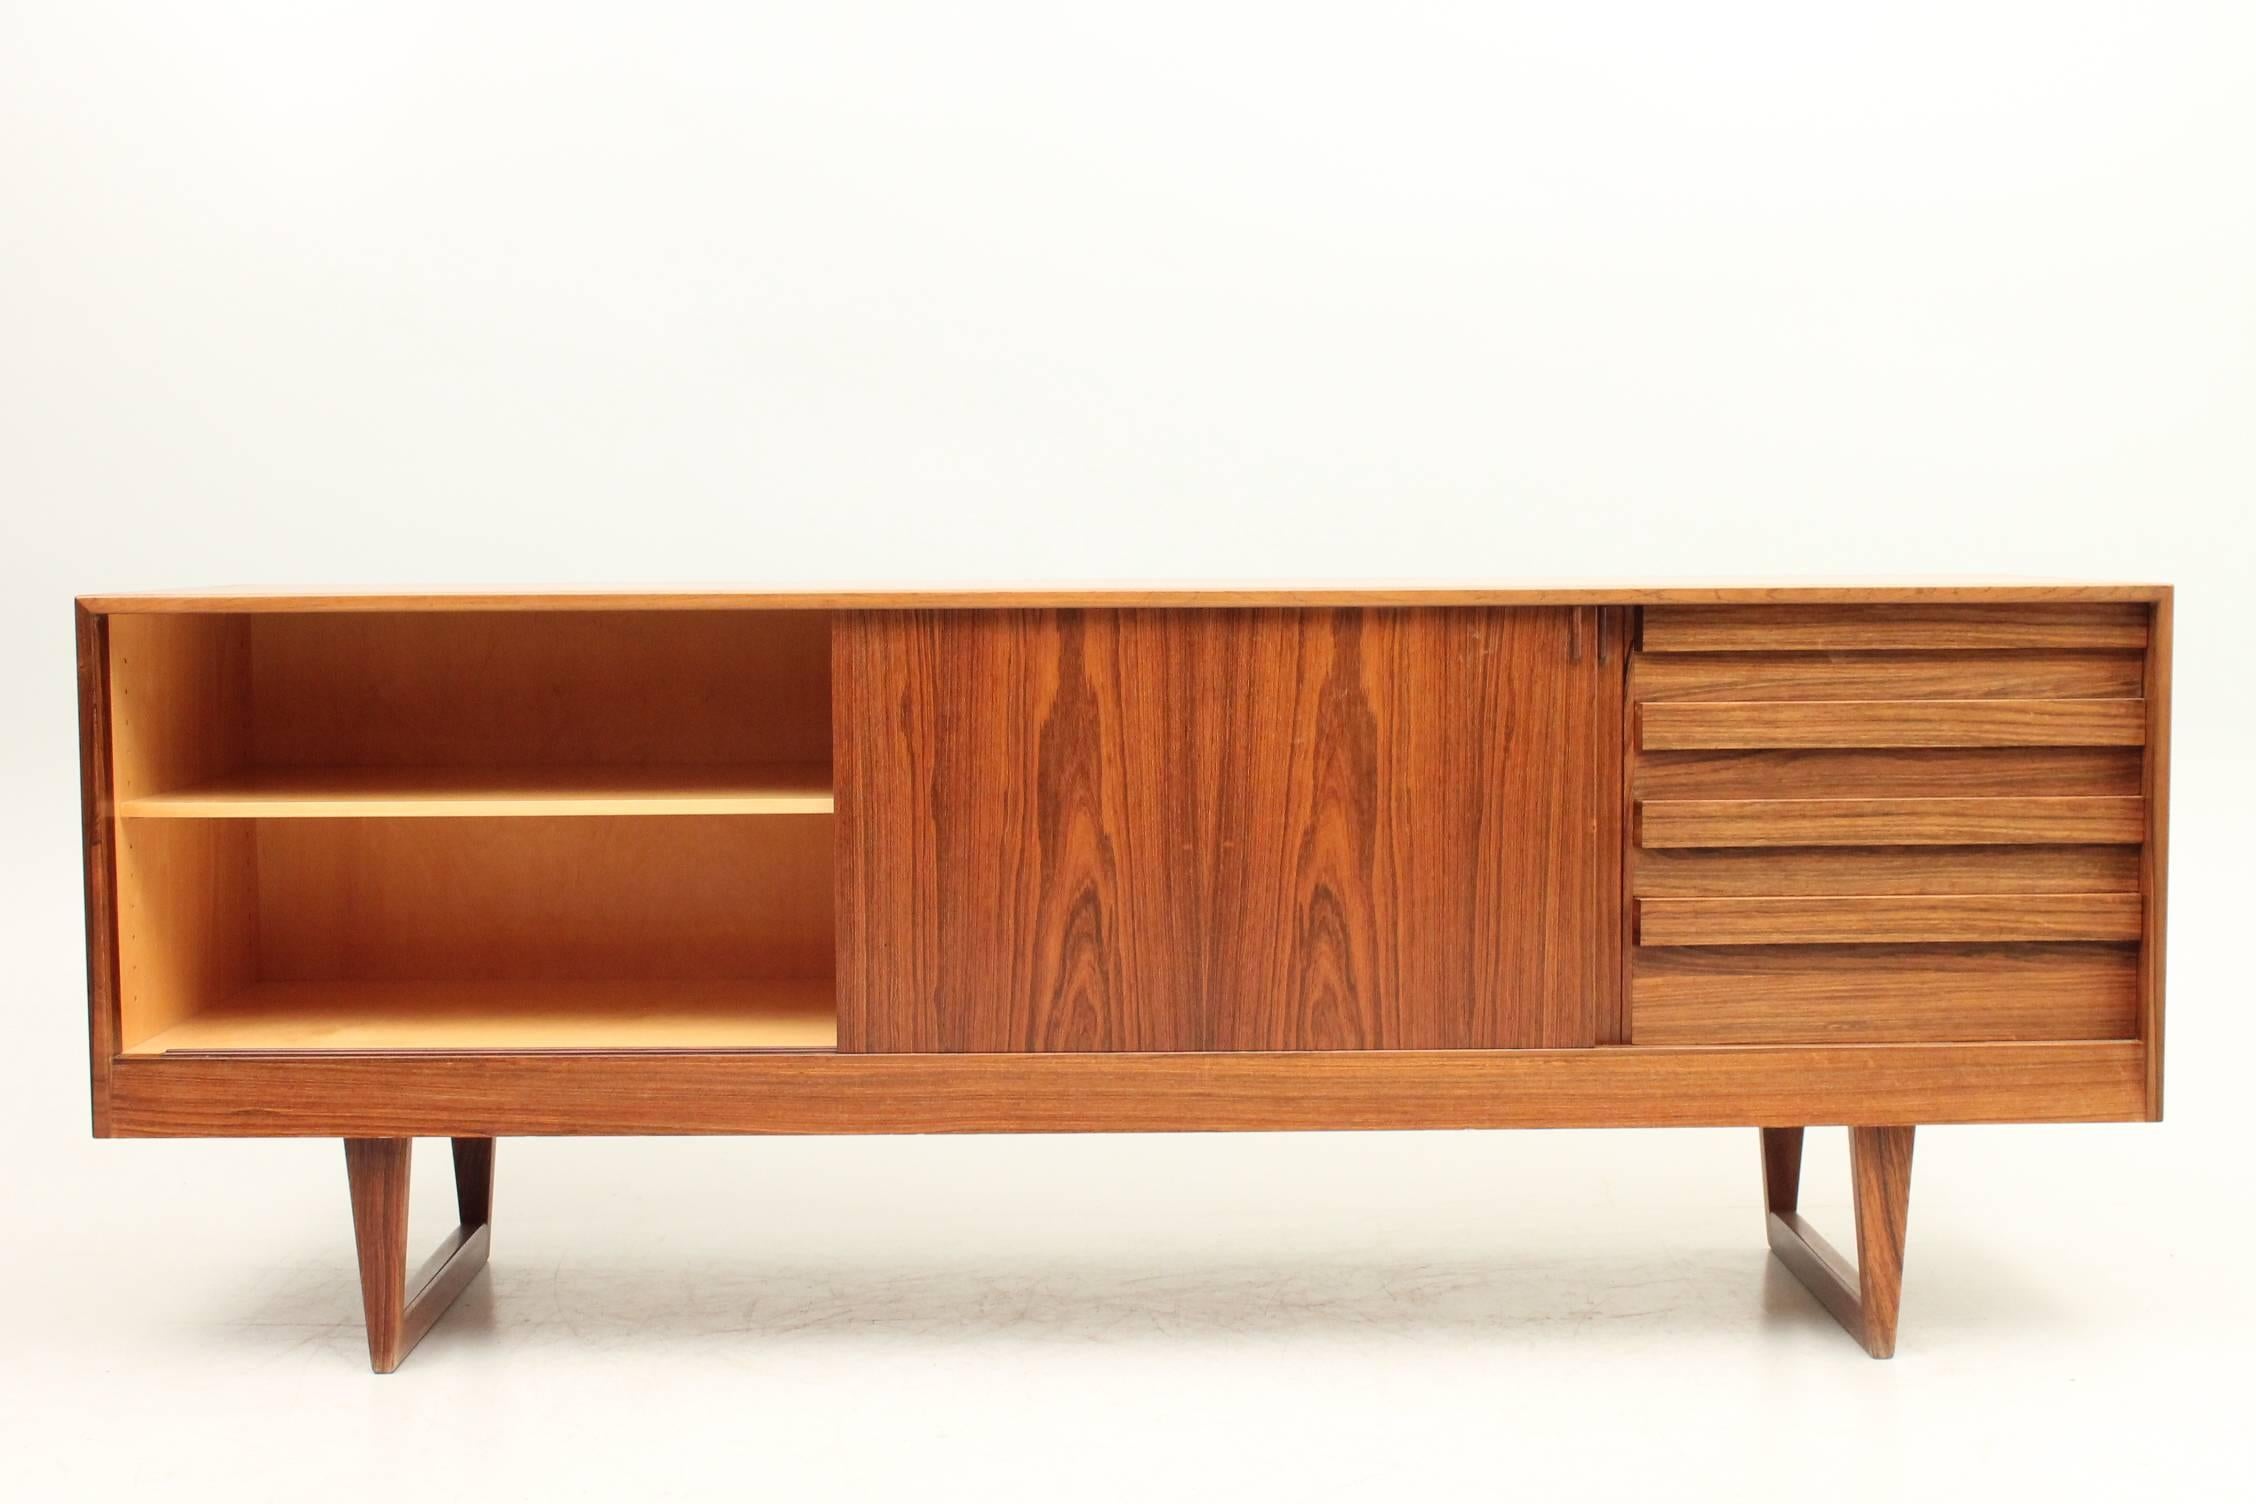 Rosewood credenza designed by Kurt Østervig for KP Møbler. The credenza has two sliding doors with fully adjustable shelves on the inside and drawers on the left hand side. There are many details on this credenza that make is super special - from